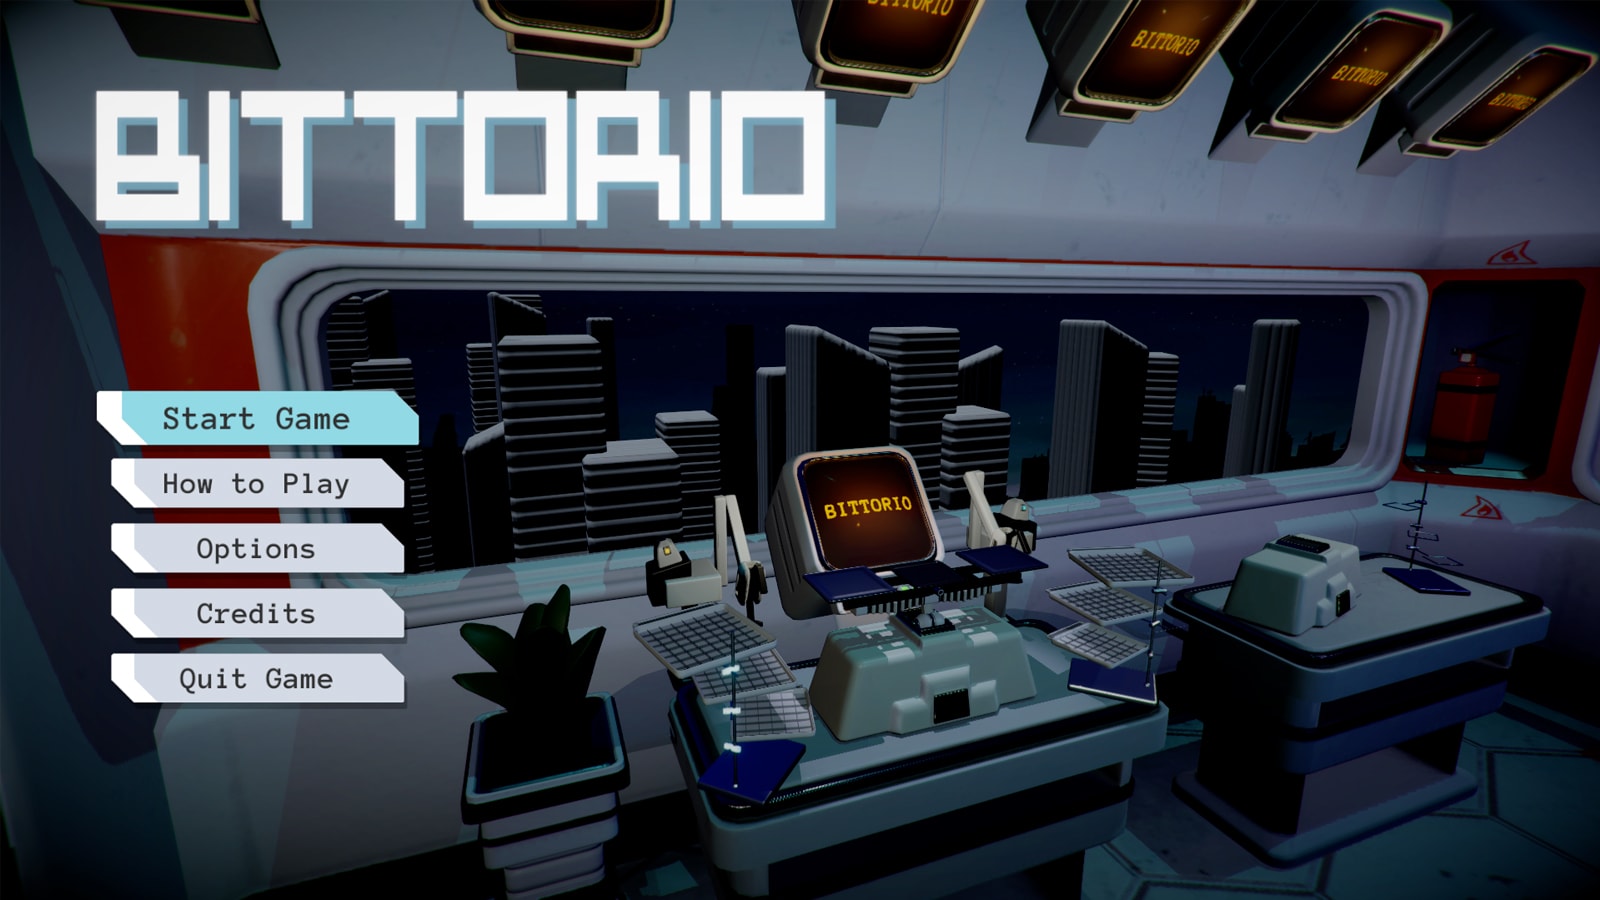 A computer with the word "BITTORIO" on it, surrounded by two robot arms and a series of gridded trays, menu to the left.